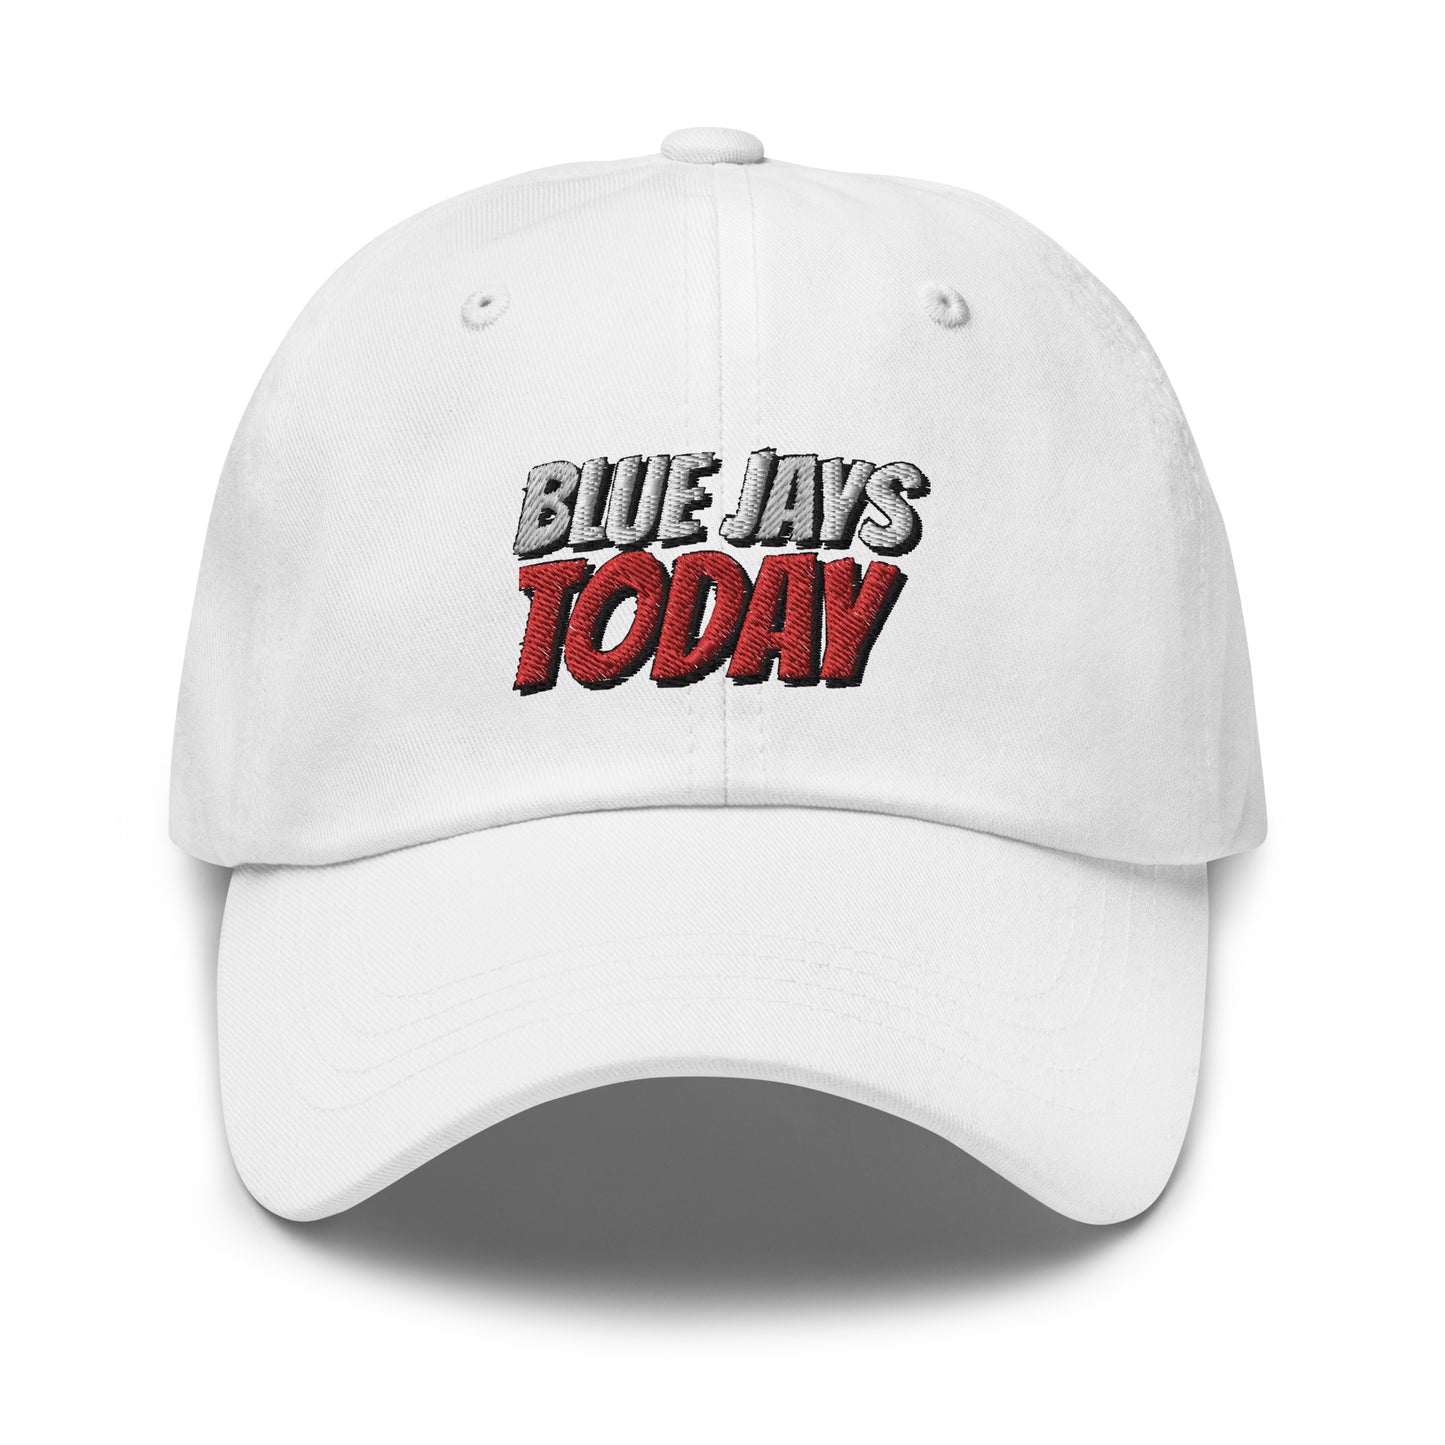 BLUE JAYS TODAY Dad Hat